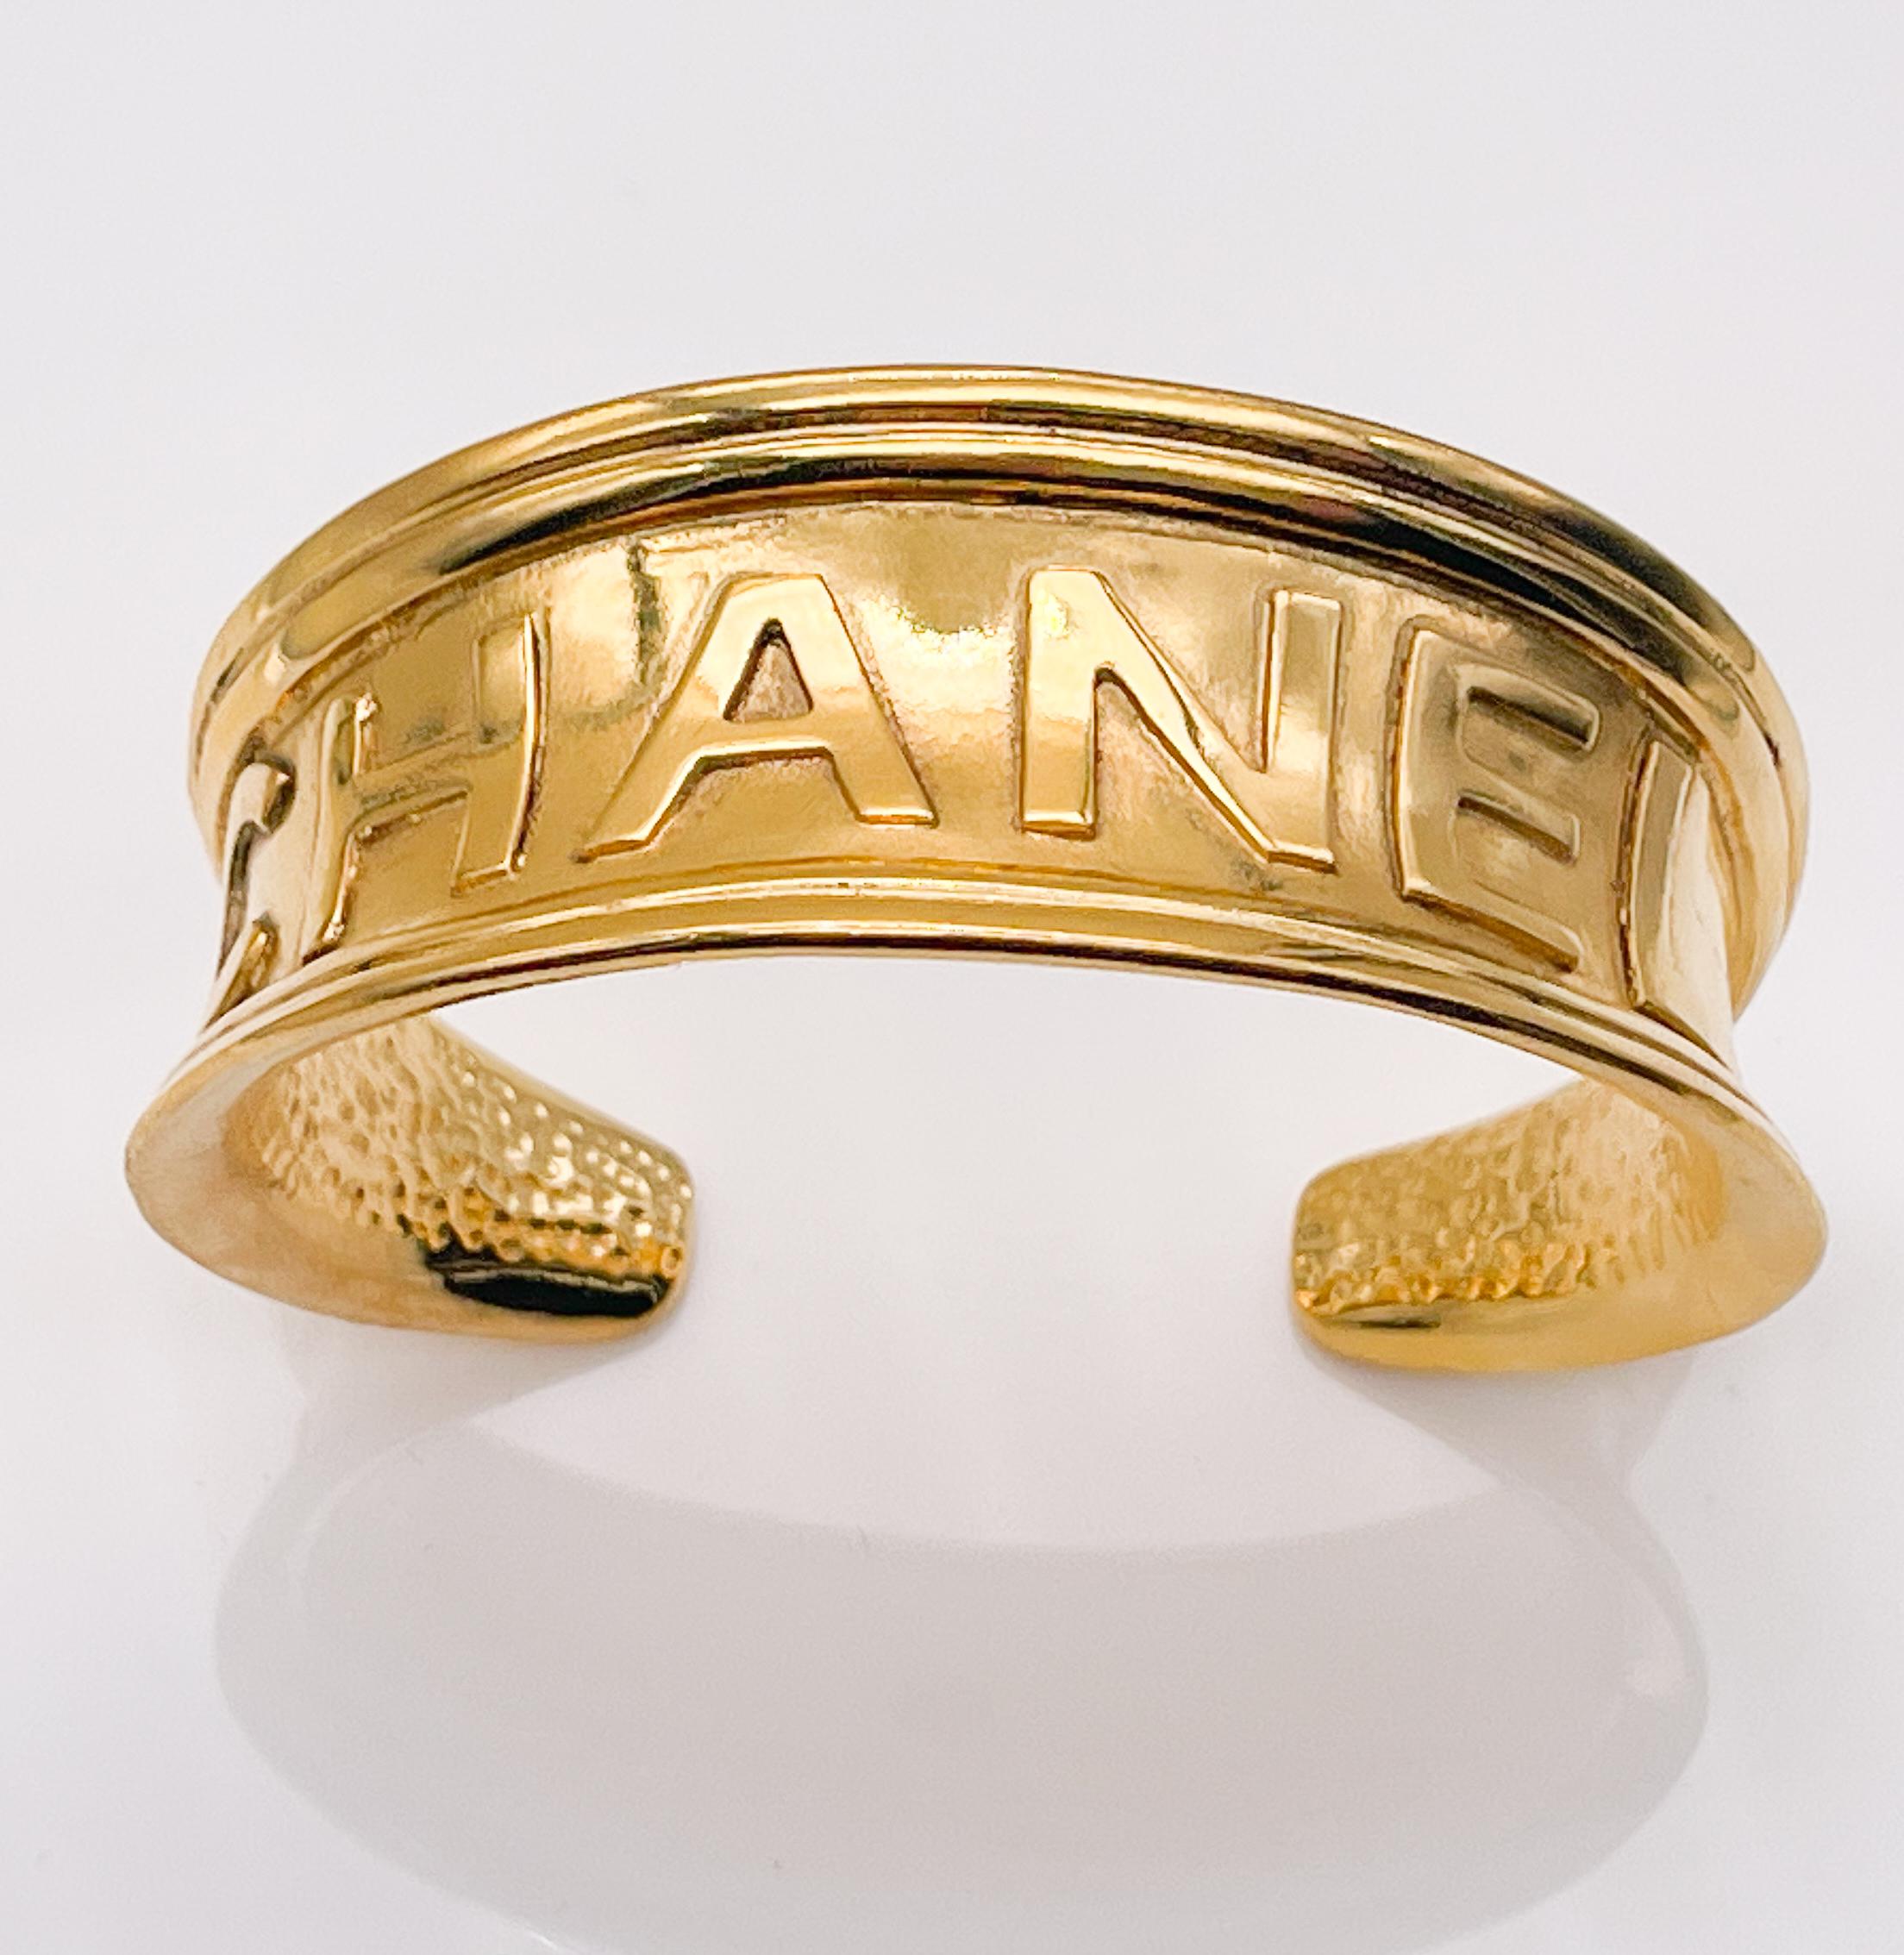 CHANEL VINTAGE CUFF BRACELET

From the Spring 1996 Collection by Karl Lagerfeld
Gold-Plated
Includes Jewelry Pouch

The is a great bracelet that is scaled to wear everyday.
It will be a perfect companion piece to stack with your fine